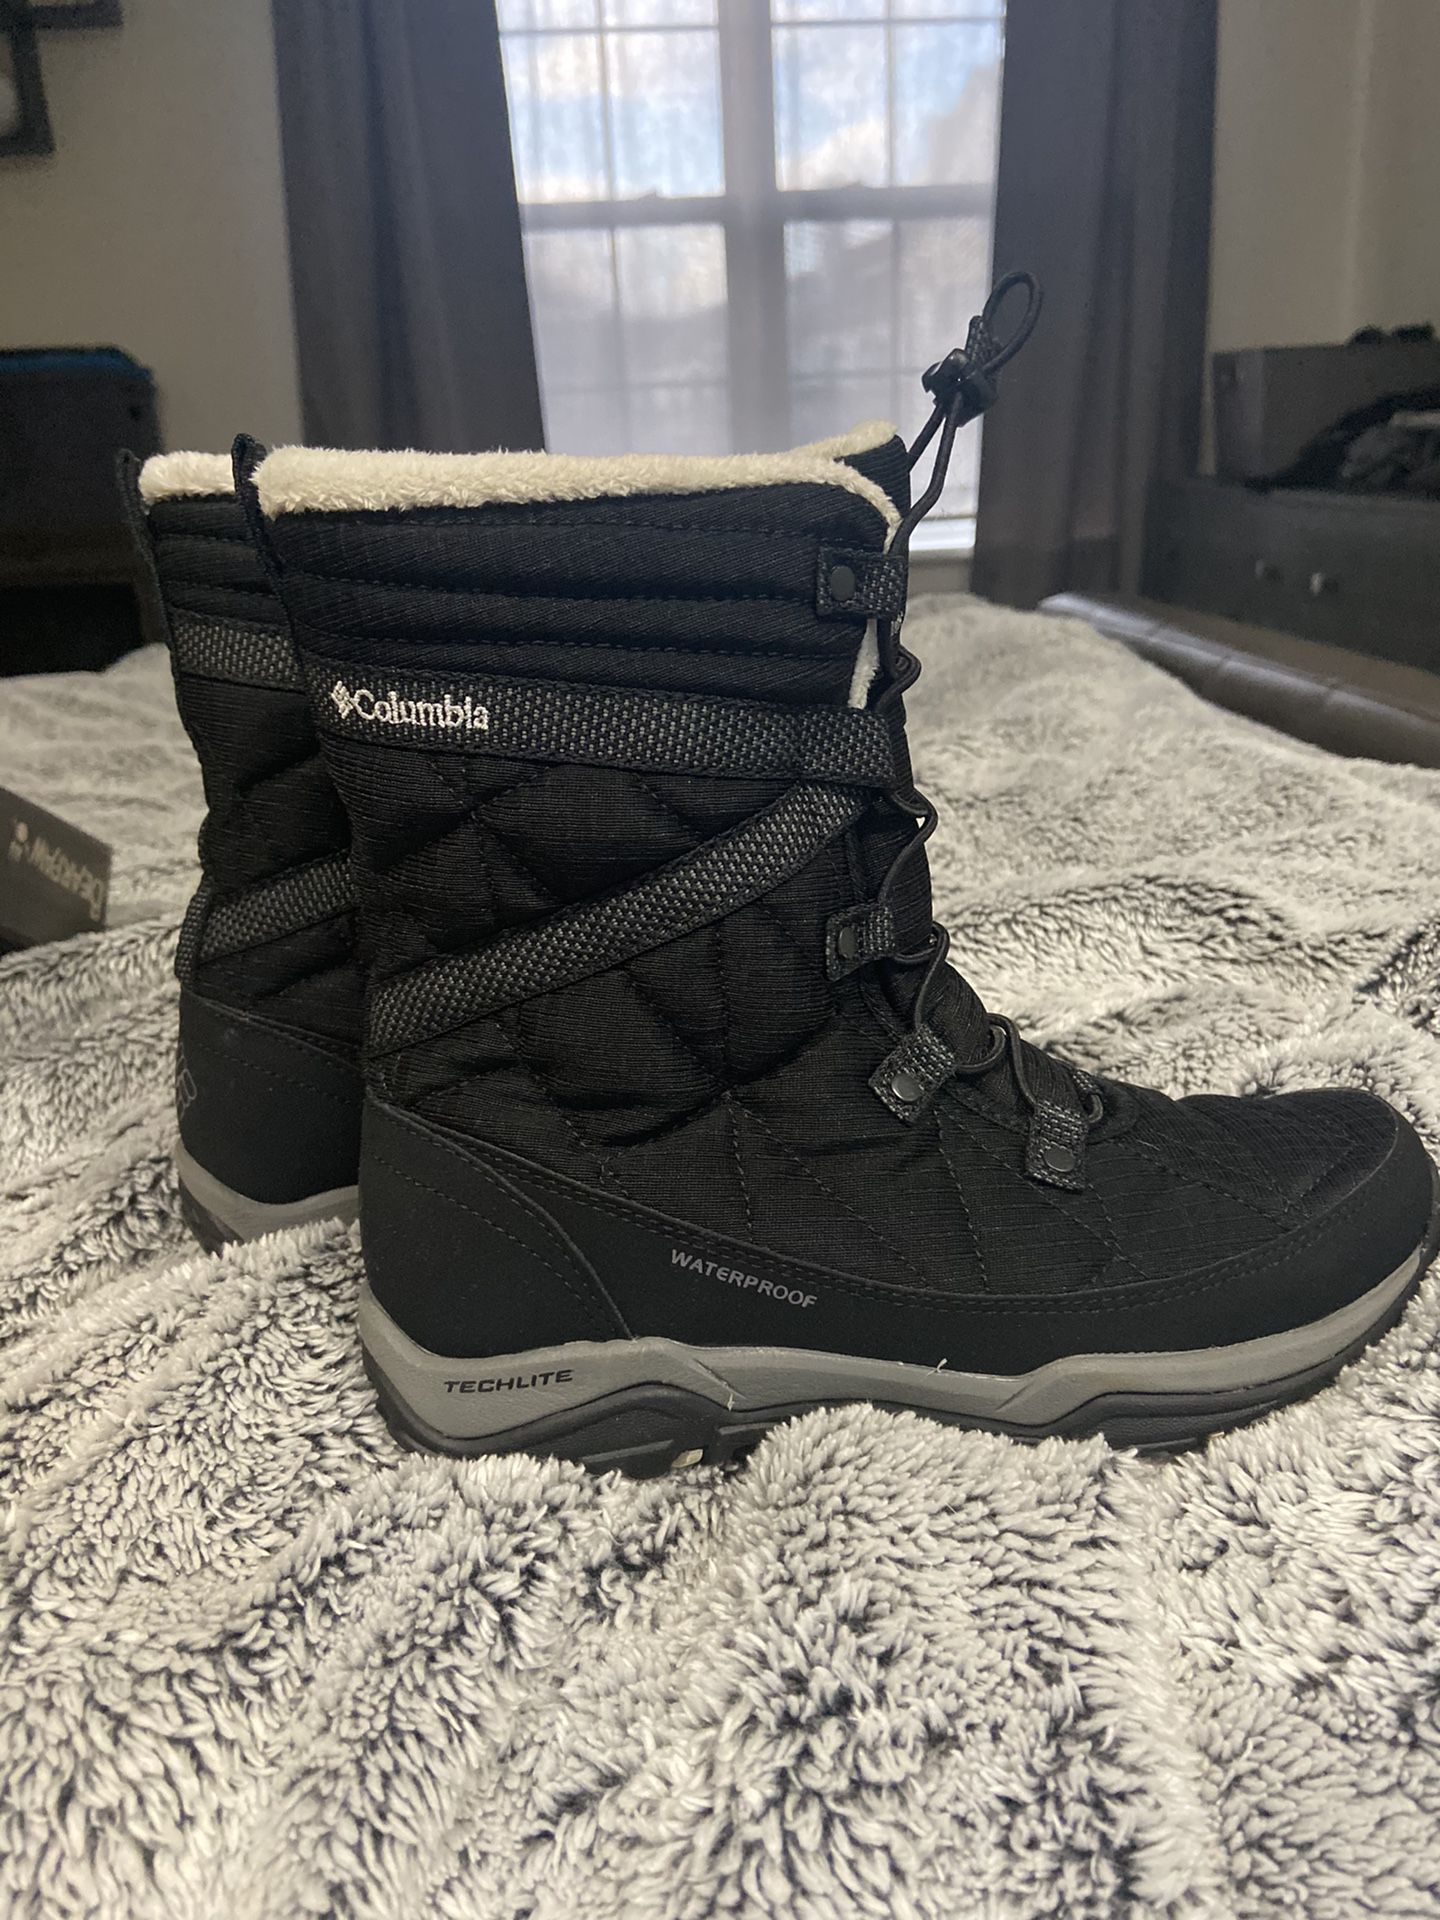 Columbia waterproof winter boots size 6 for girls